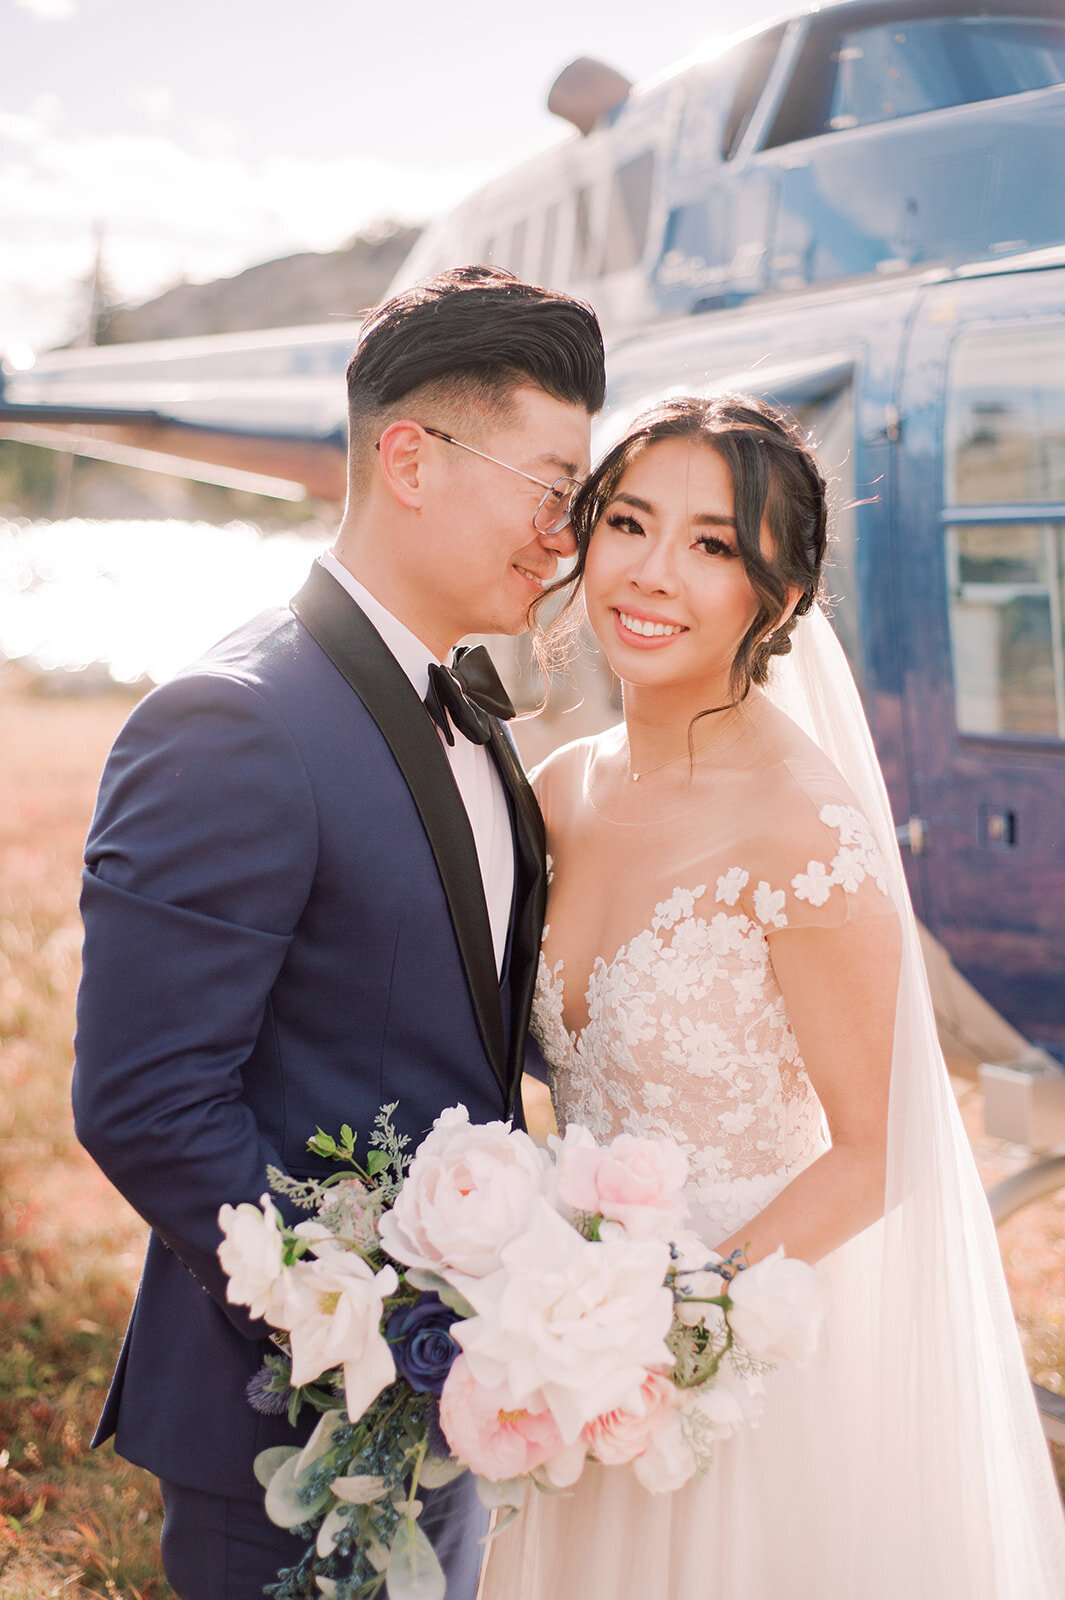 Newlyweds  stand in front of a blue helicopter on the top of a mountain and smile.